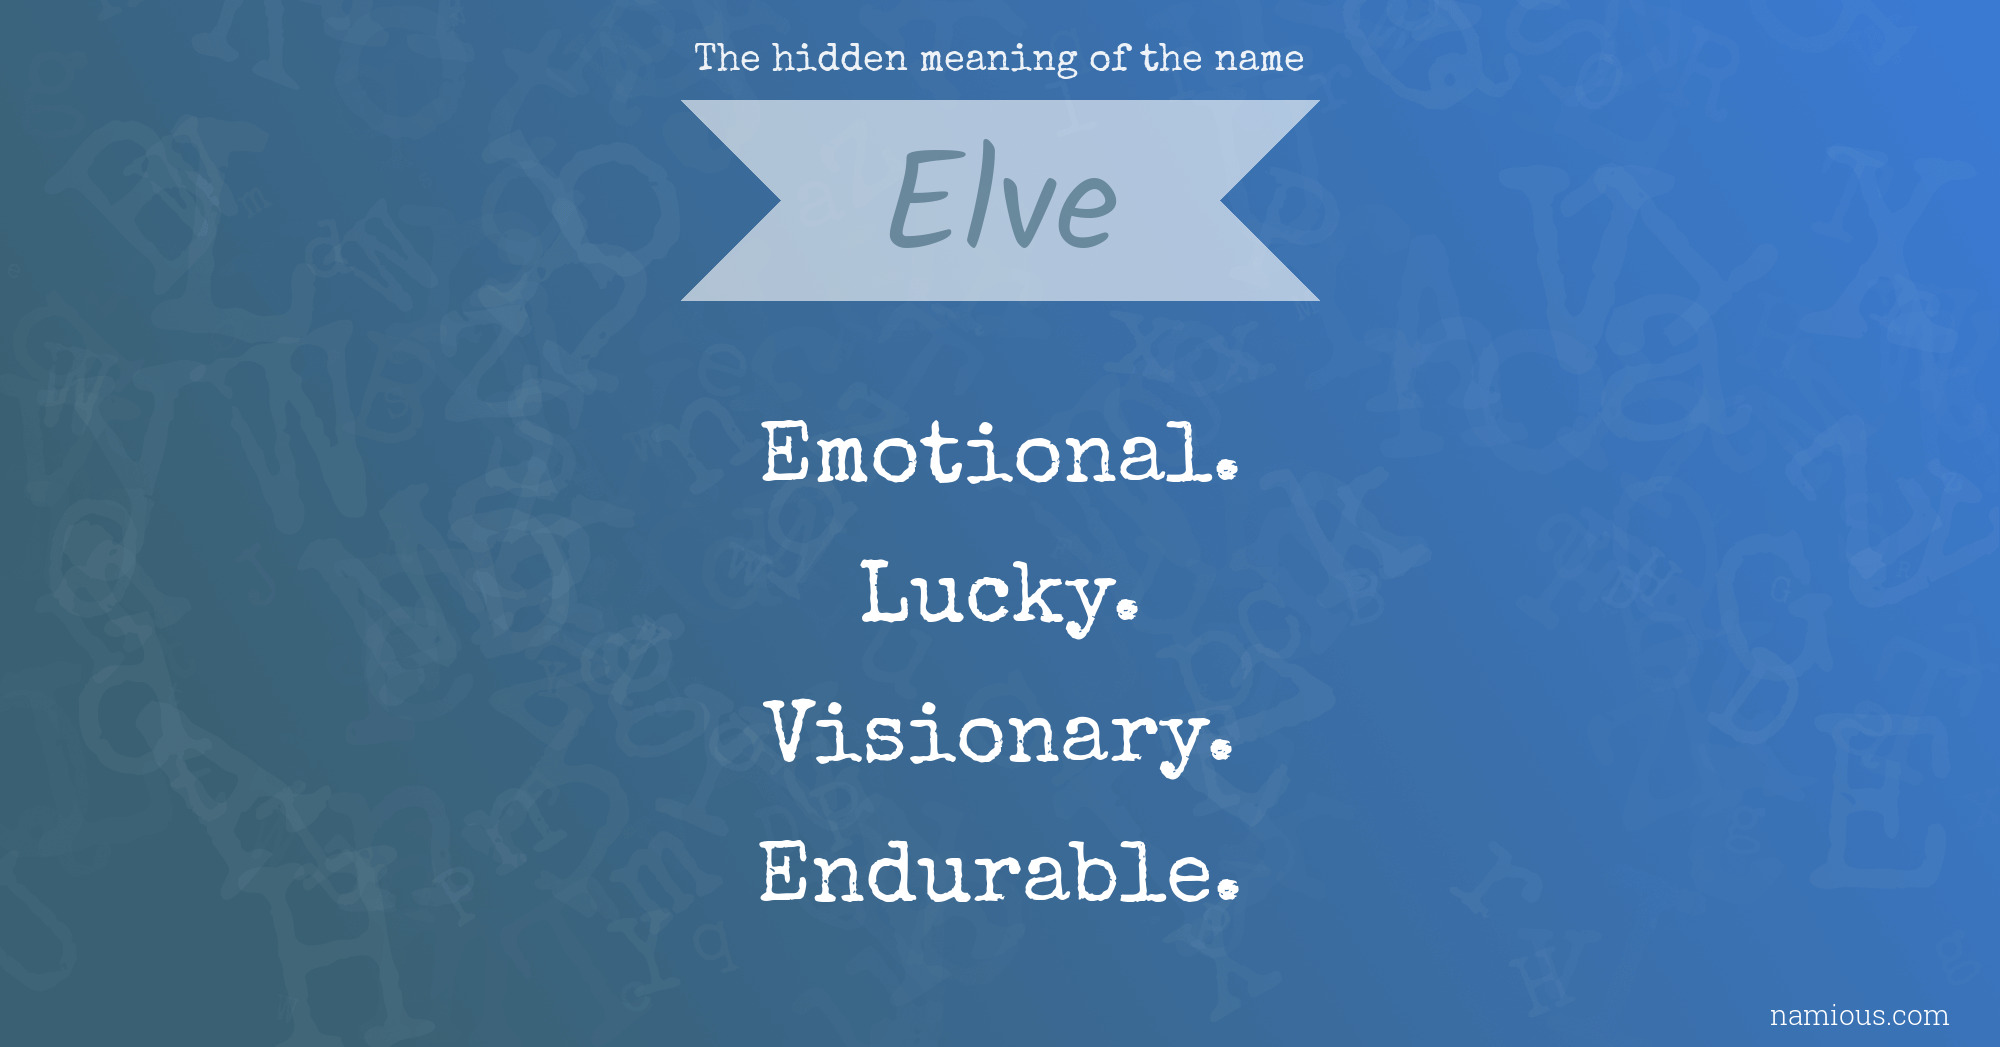 The hidden meaning of the name Elve